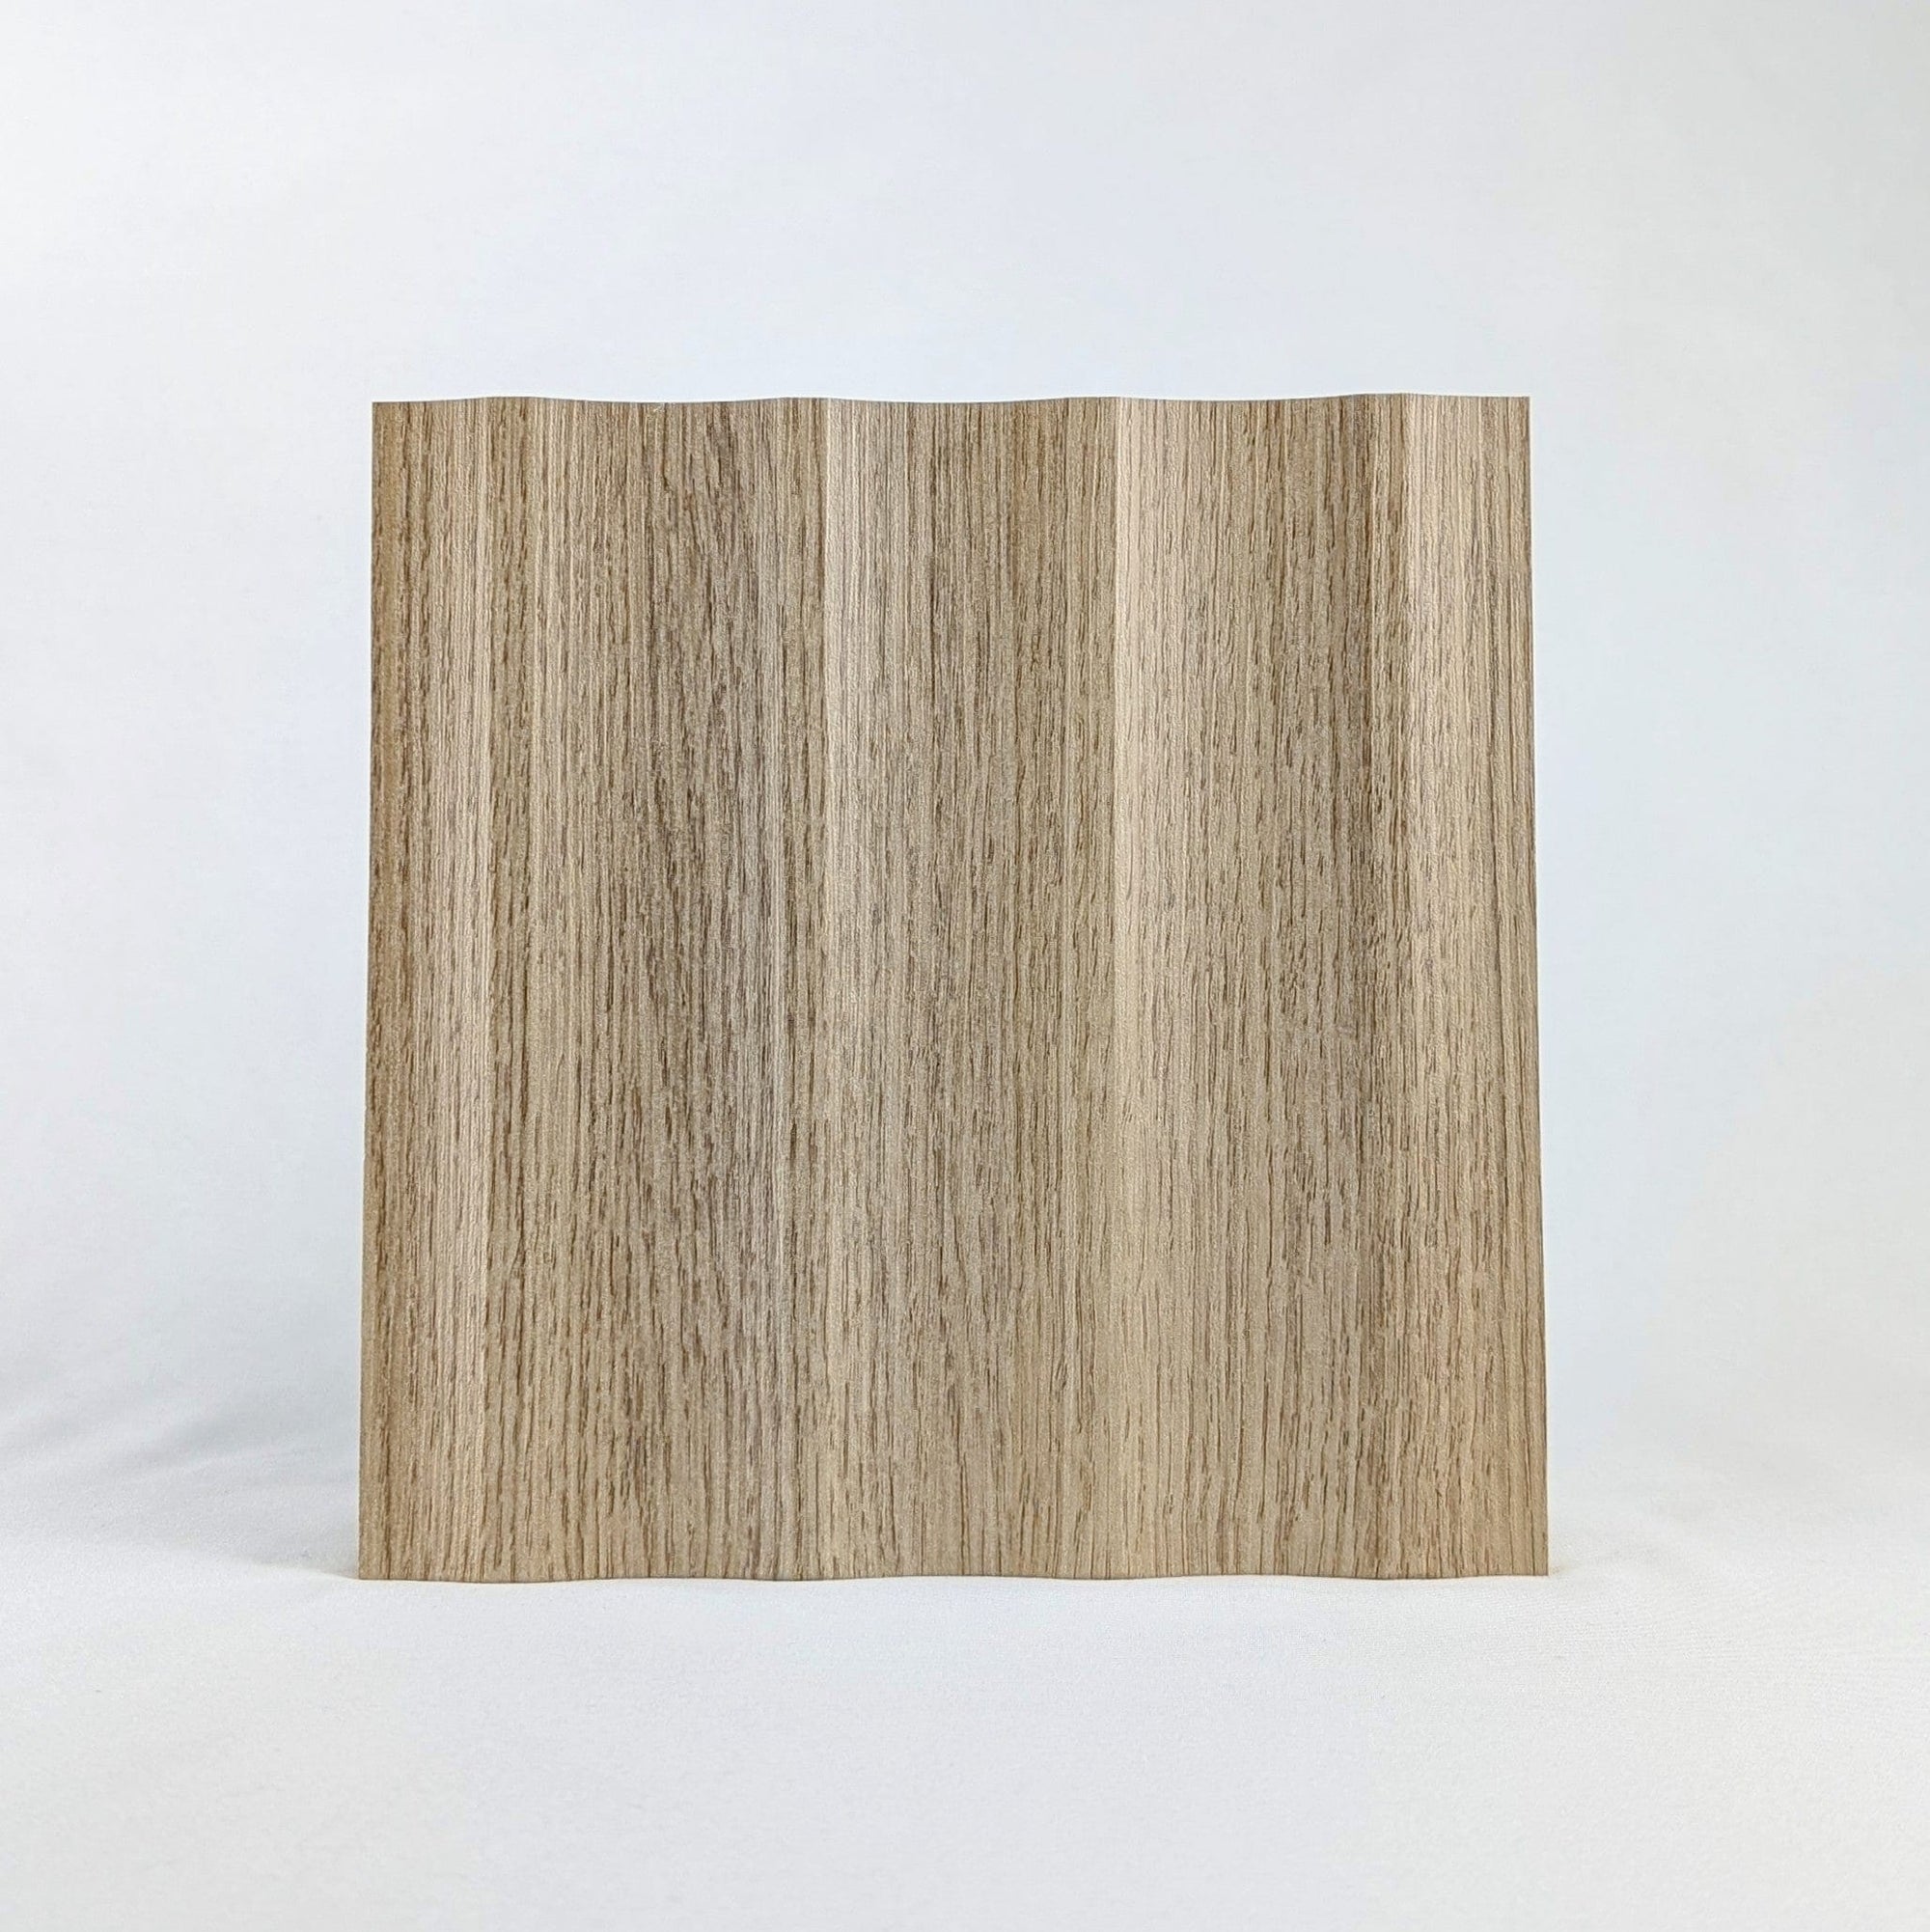 Walston Architectural Products Wall Panel Fluted (2" Flutes) / Wood Inspired Charleston Oak 8″ X 8″ SAMPLES: FLUTED, REEDED, OR SLAT WALL PANELS / WALL CLADDING